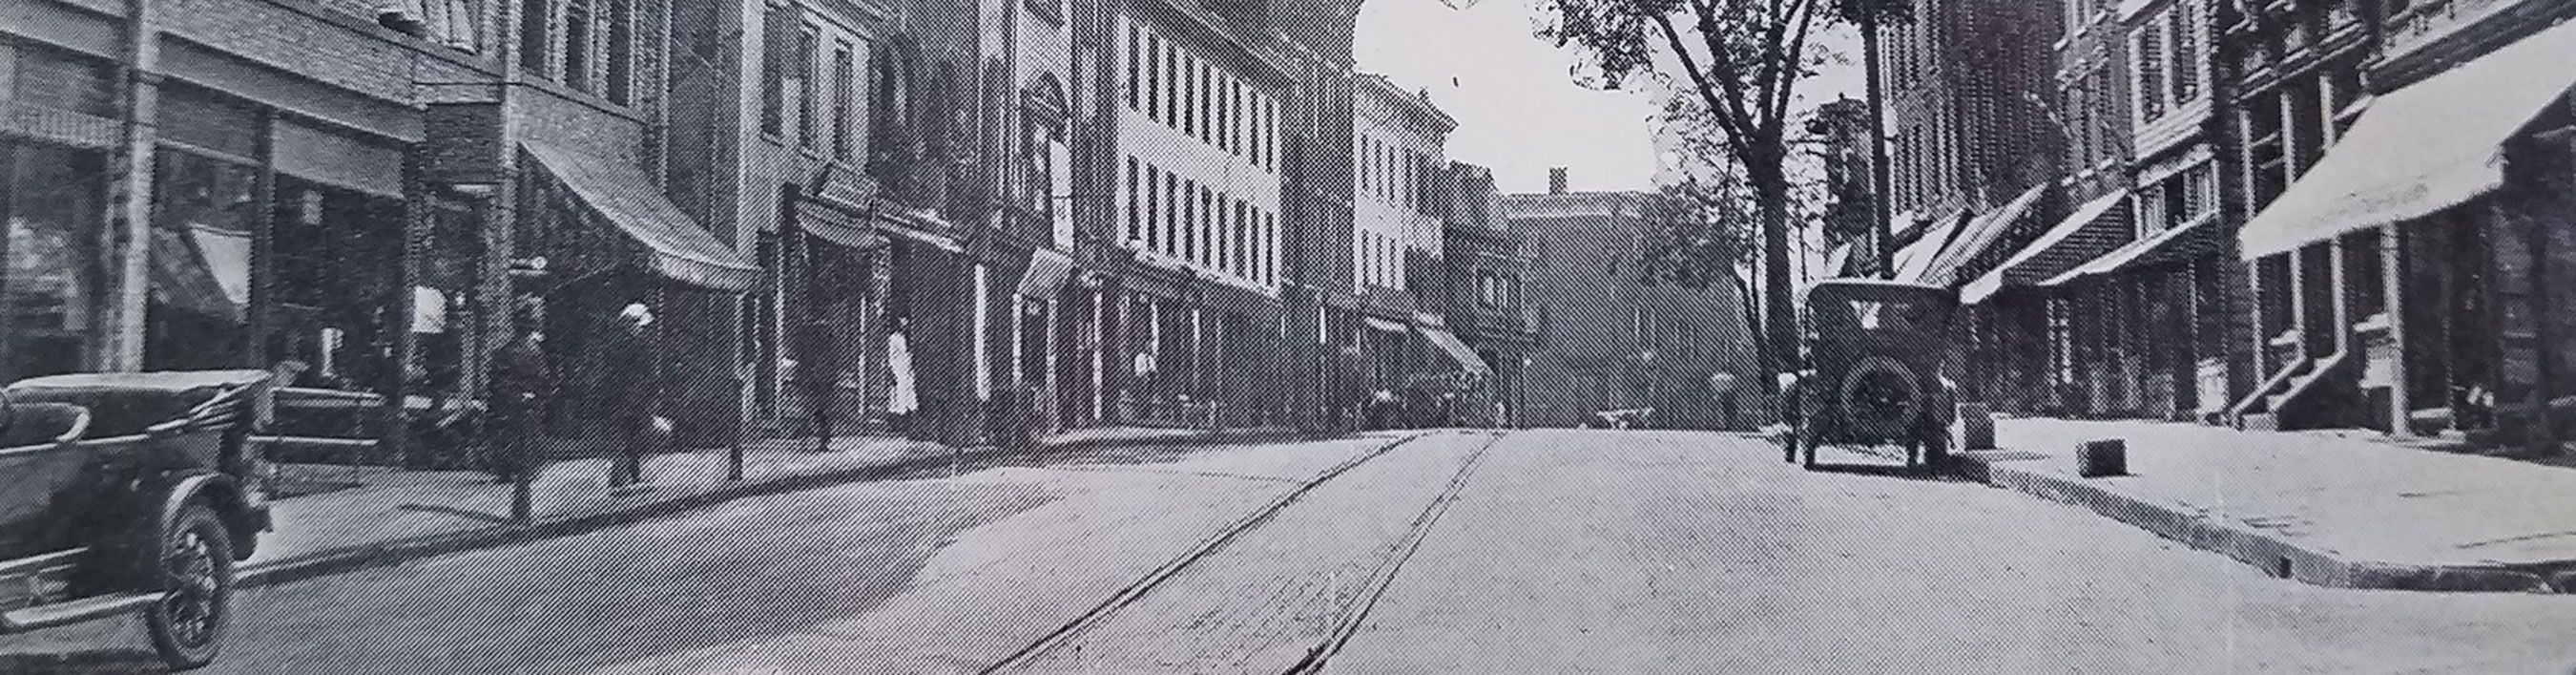 ABOUT-TAB---Main-Street-Walden-early-1900s-(1).jpg